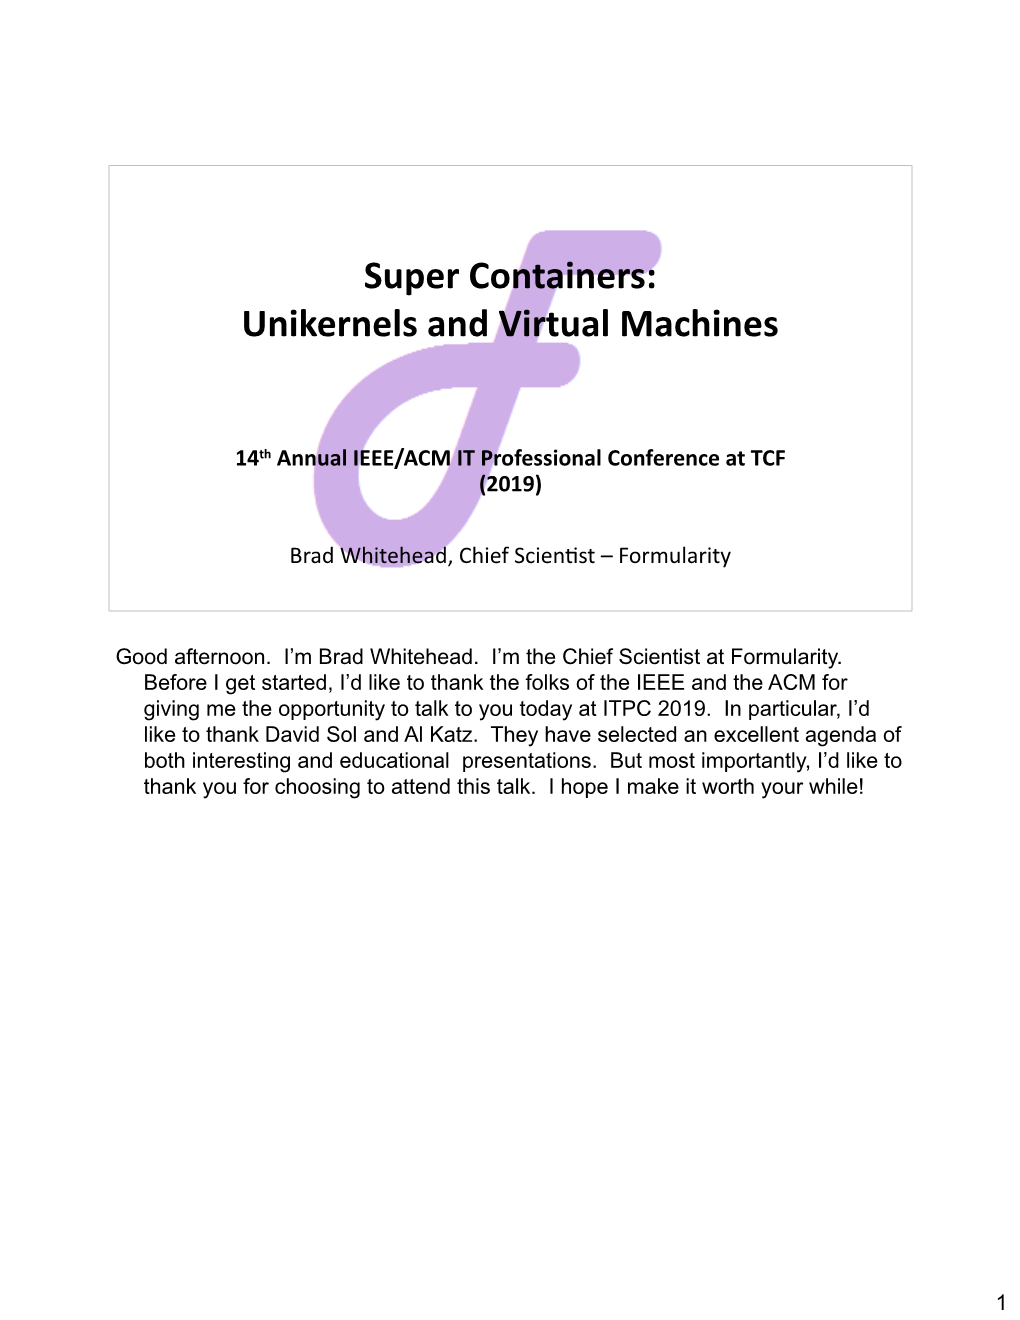 Super Containers: Unikernels and Virtual Machines